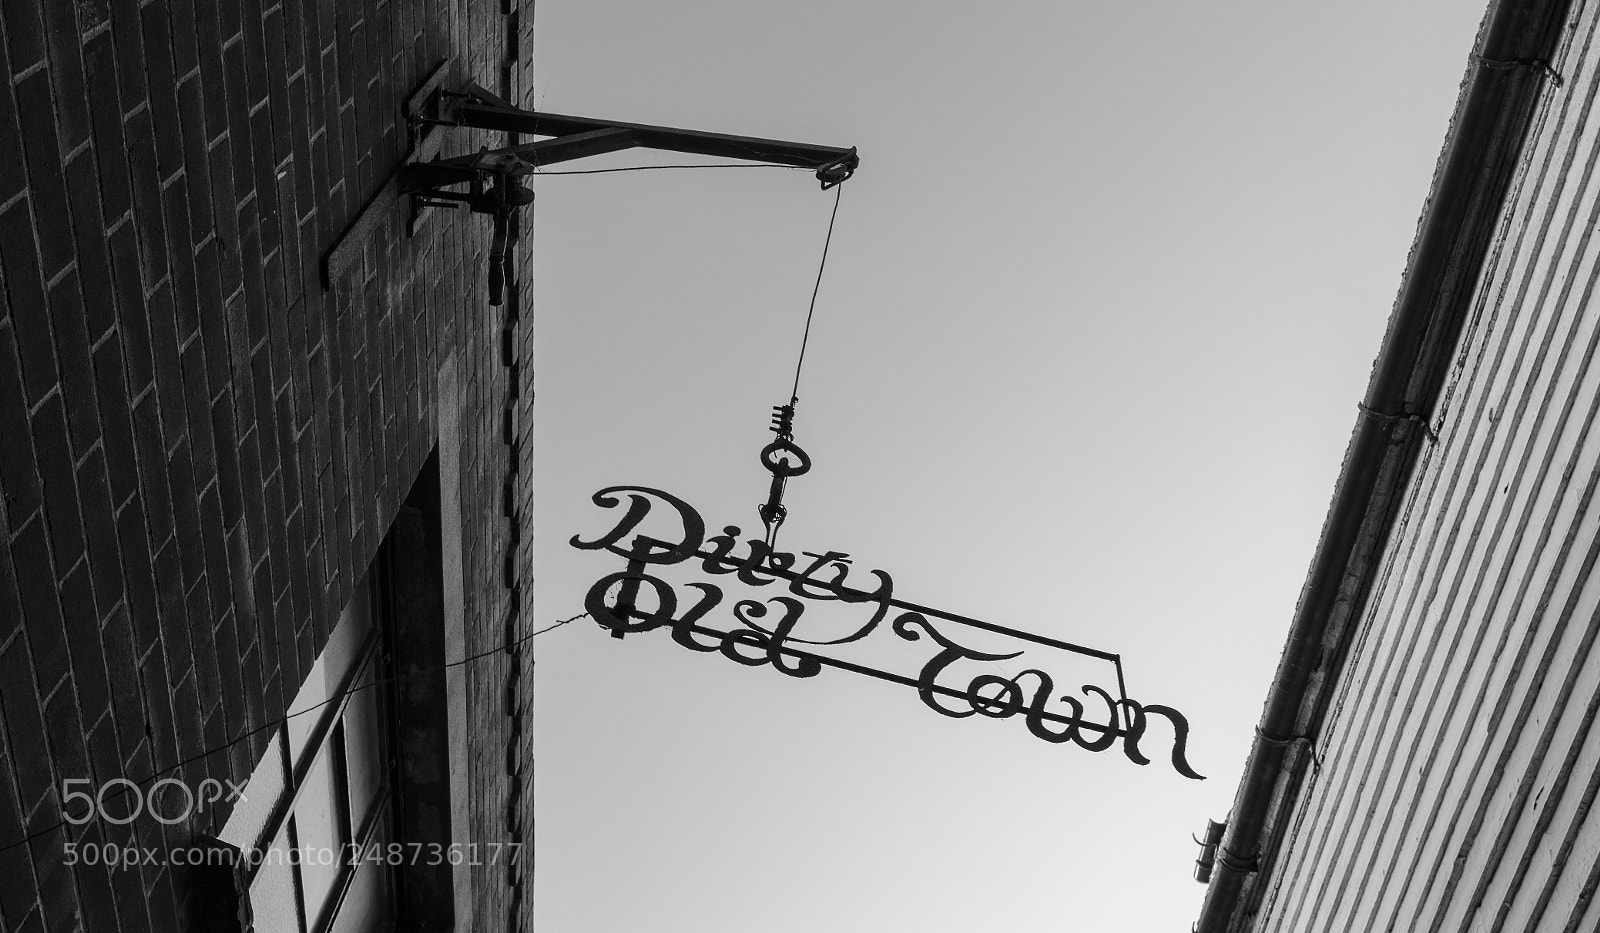 Nikon D810 sample photo. Dirty old town photography